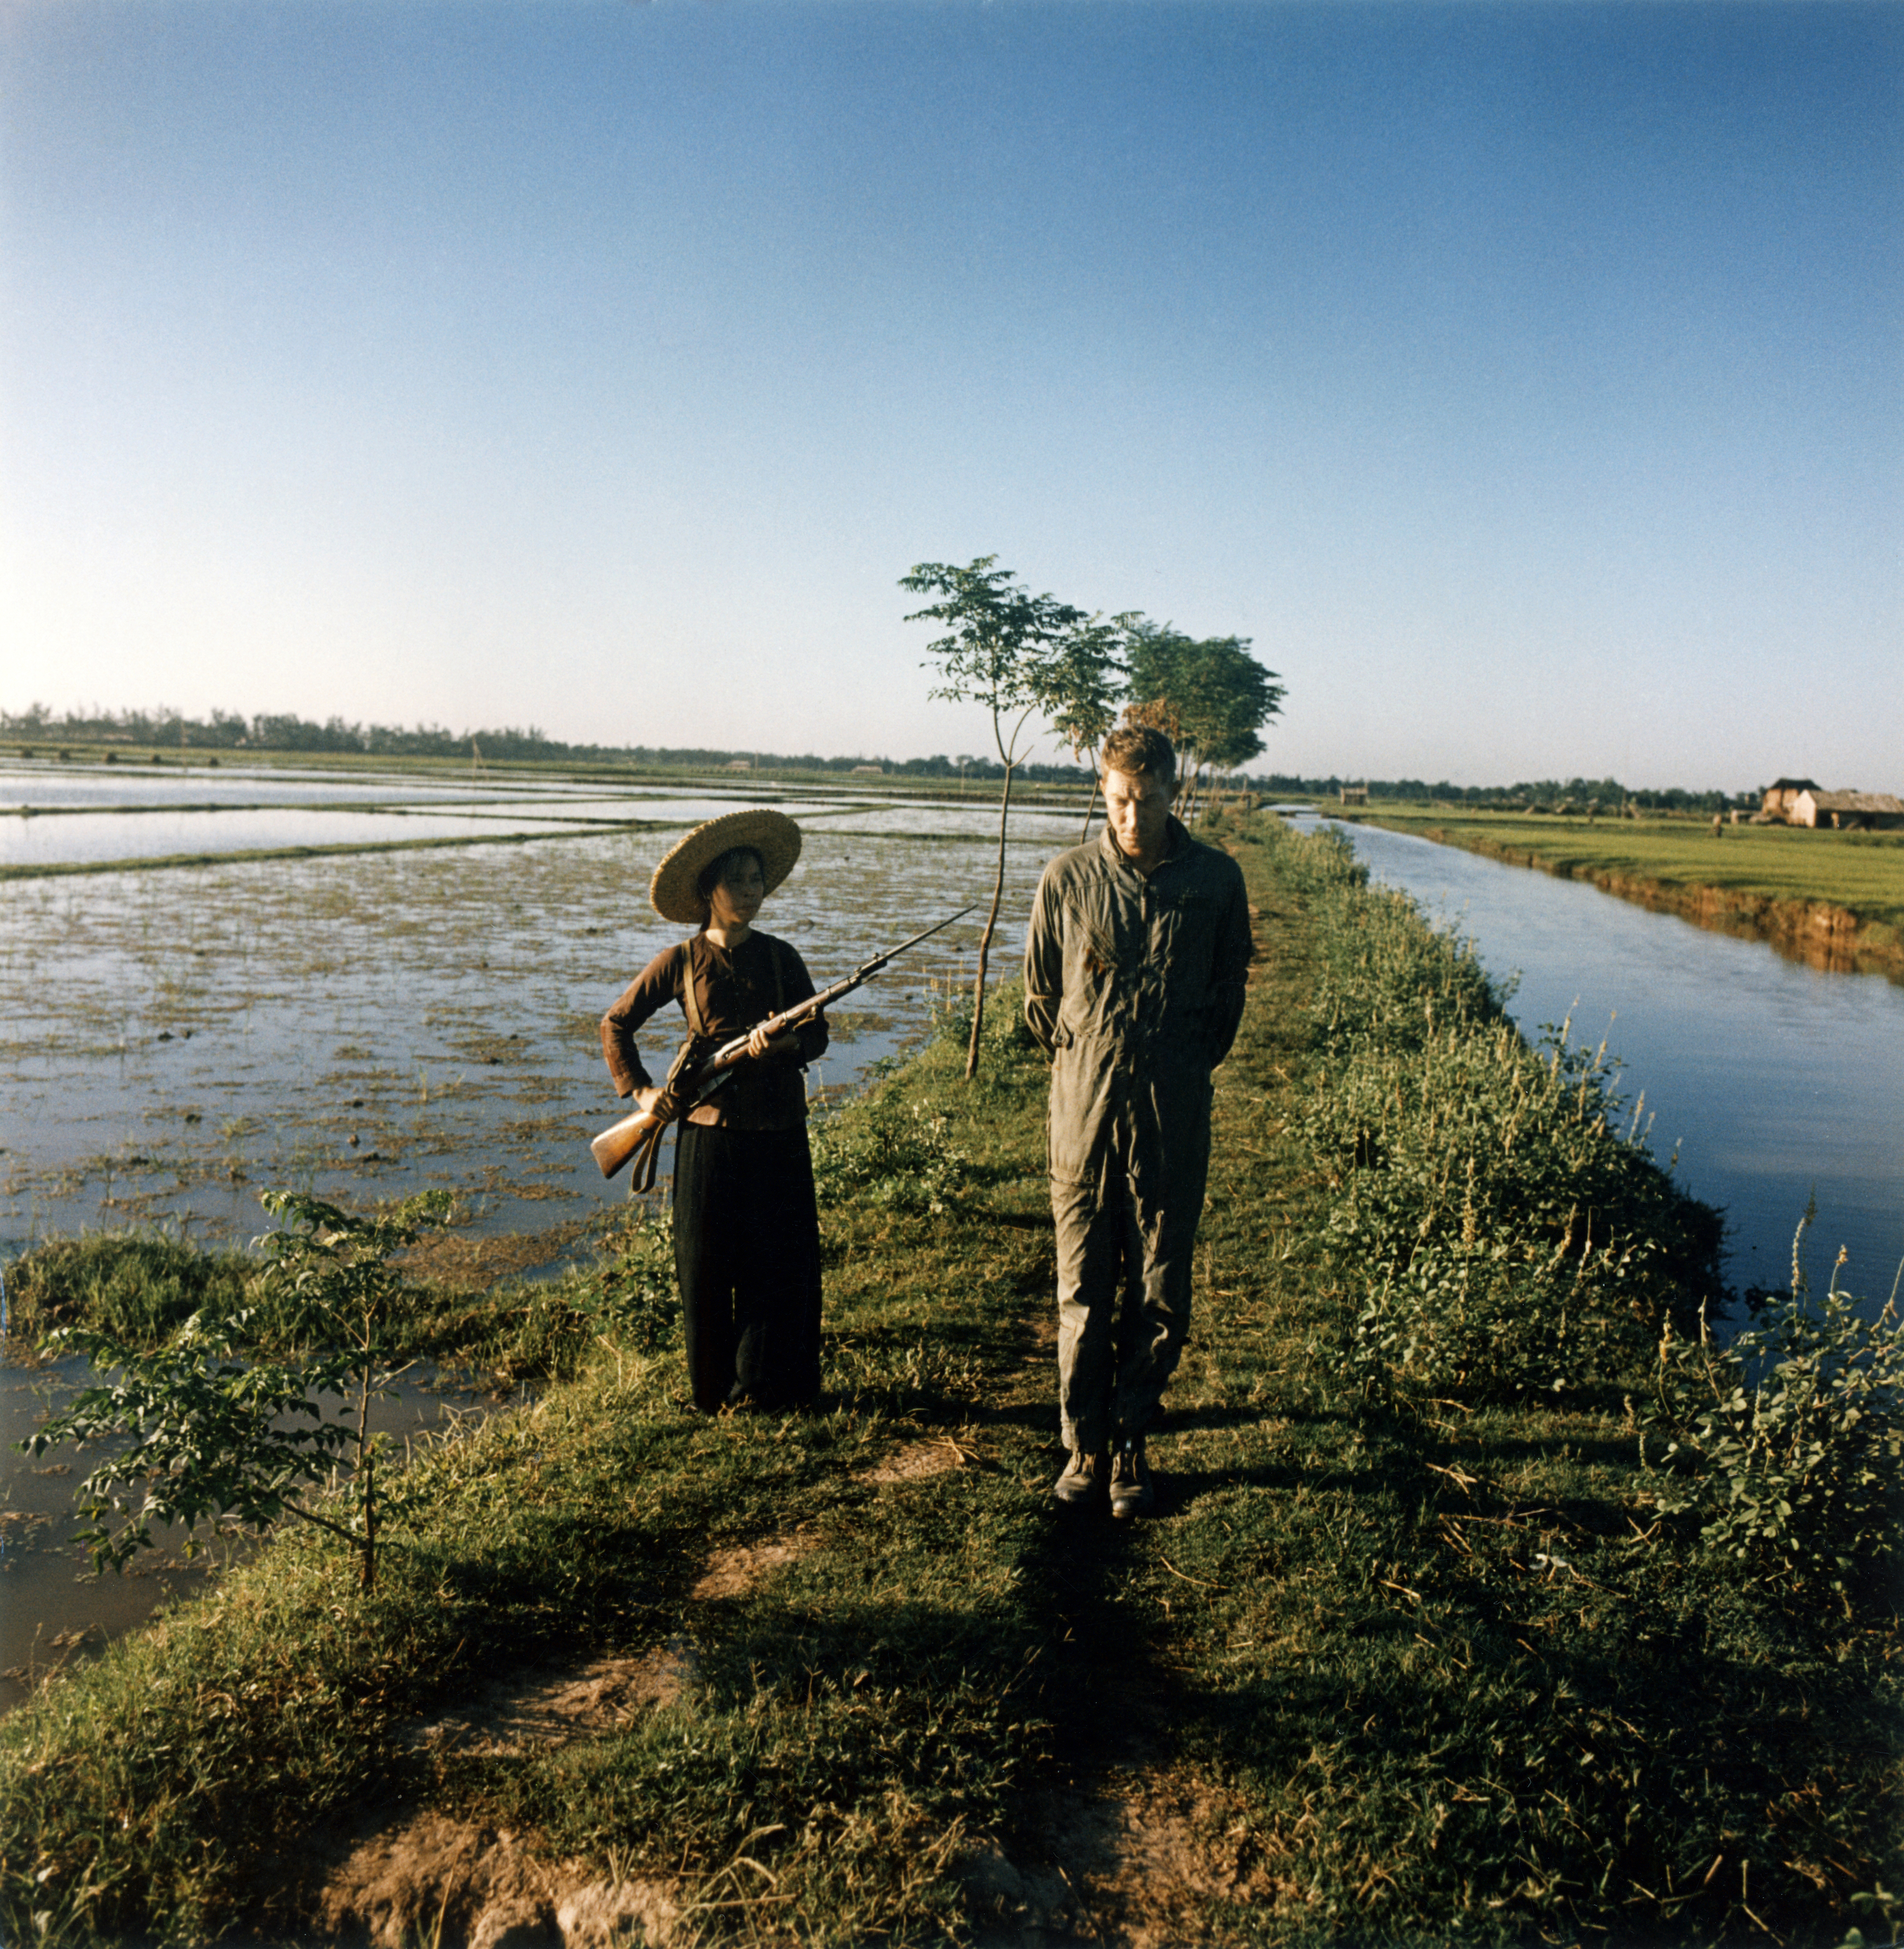 Captured U.S. pilot major Dewey Waddell is guarded by a militiawoman with a gun and a bayonet on a rice field. Vietnam, 1967. (ullstein bild via Getty Images)